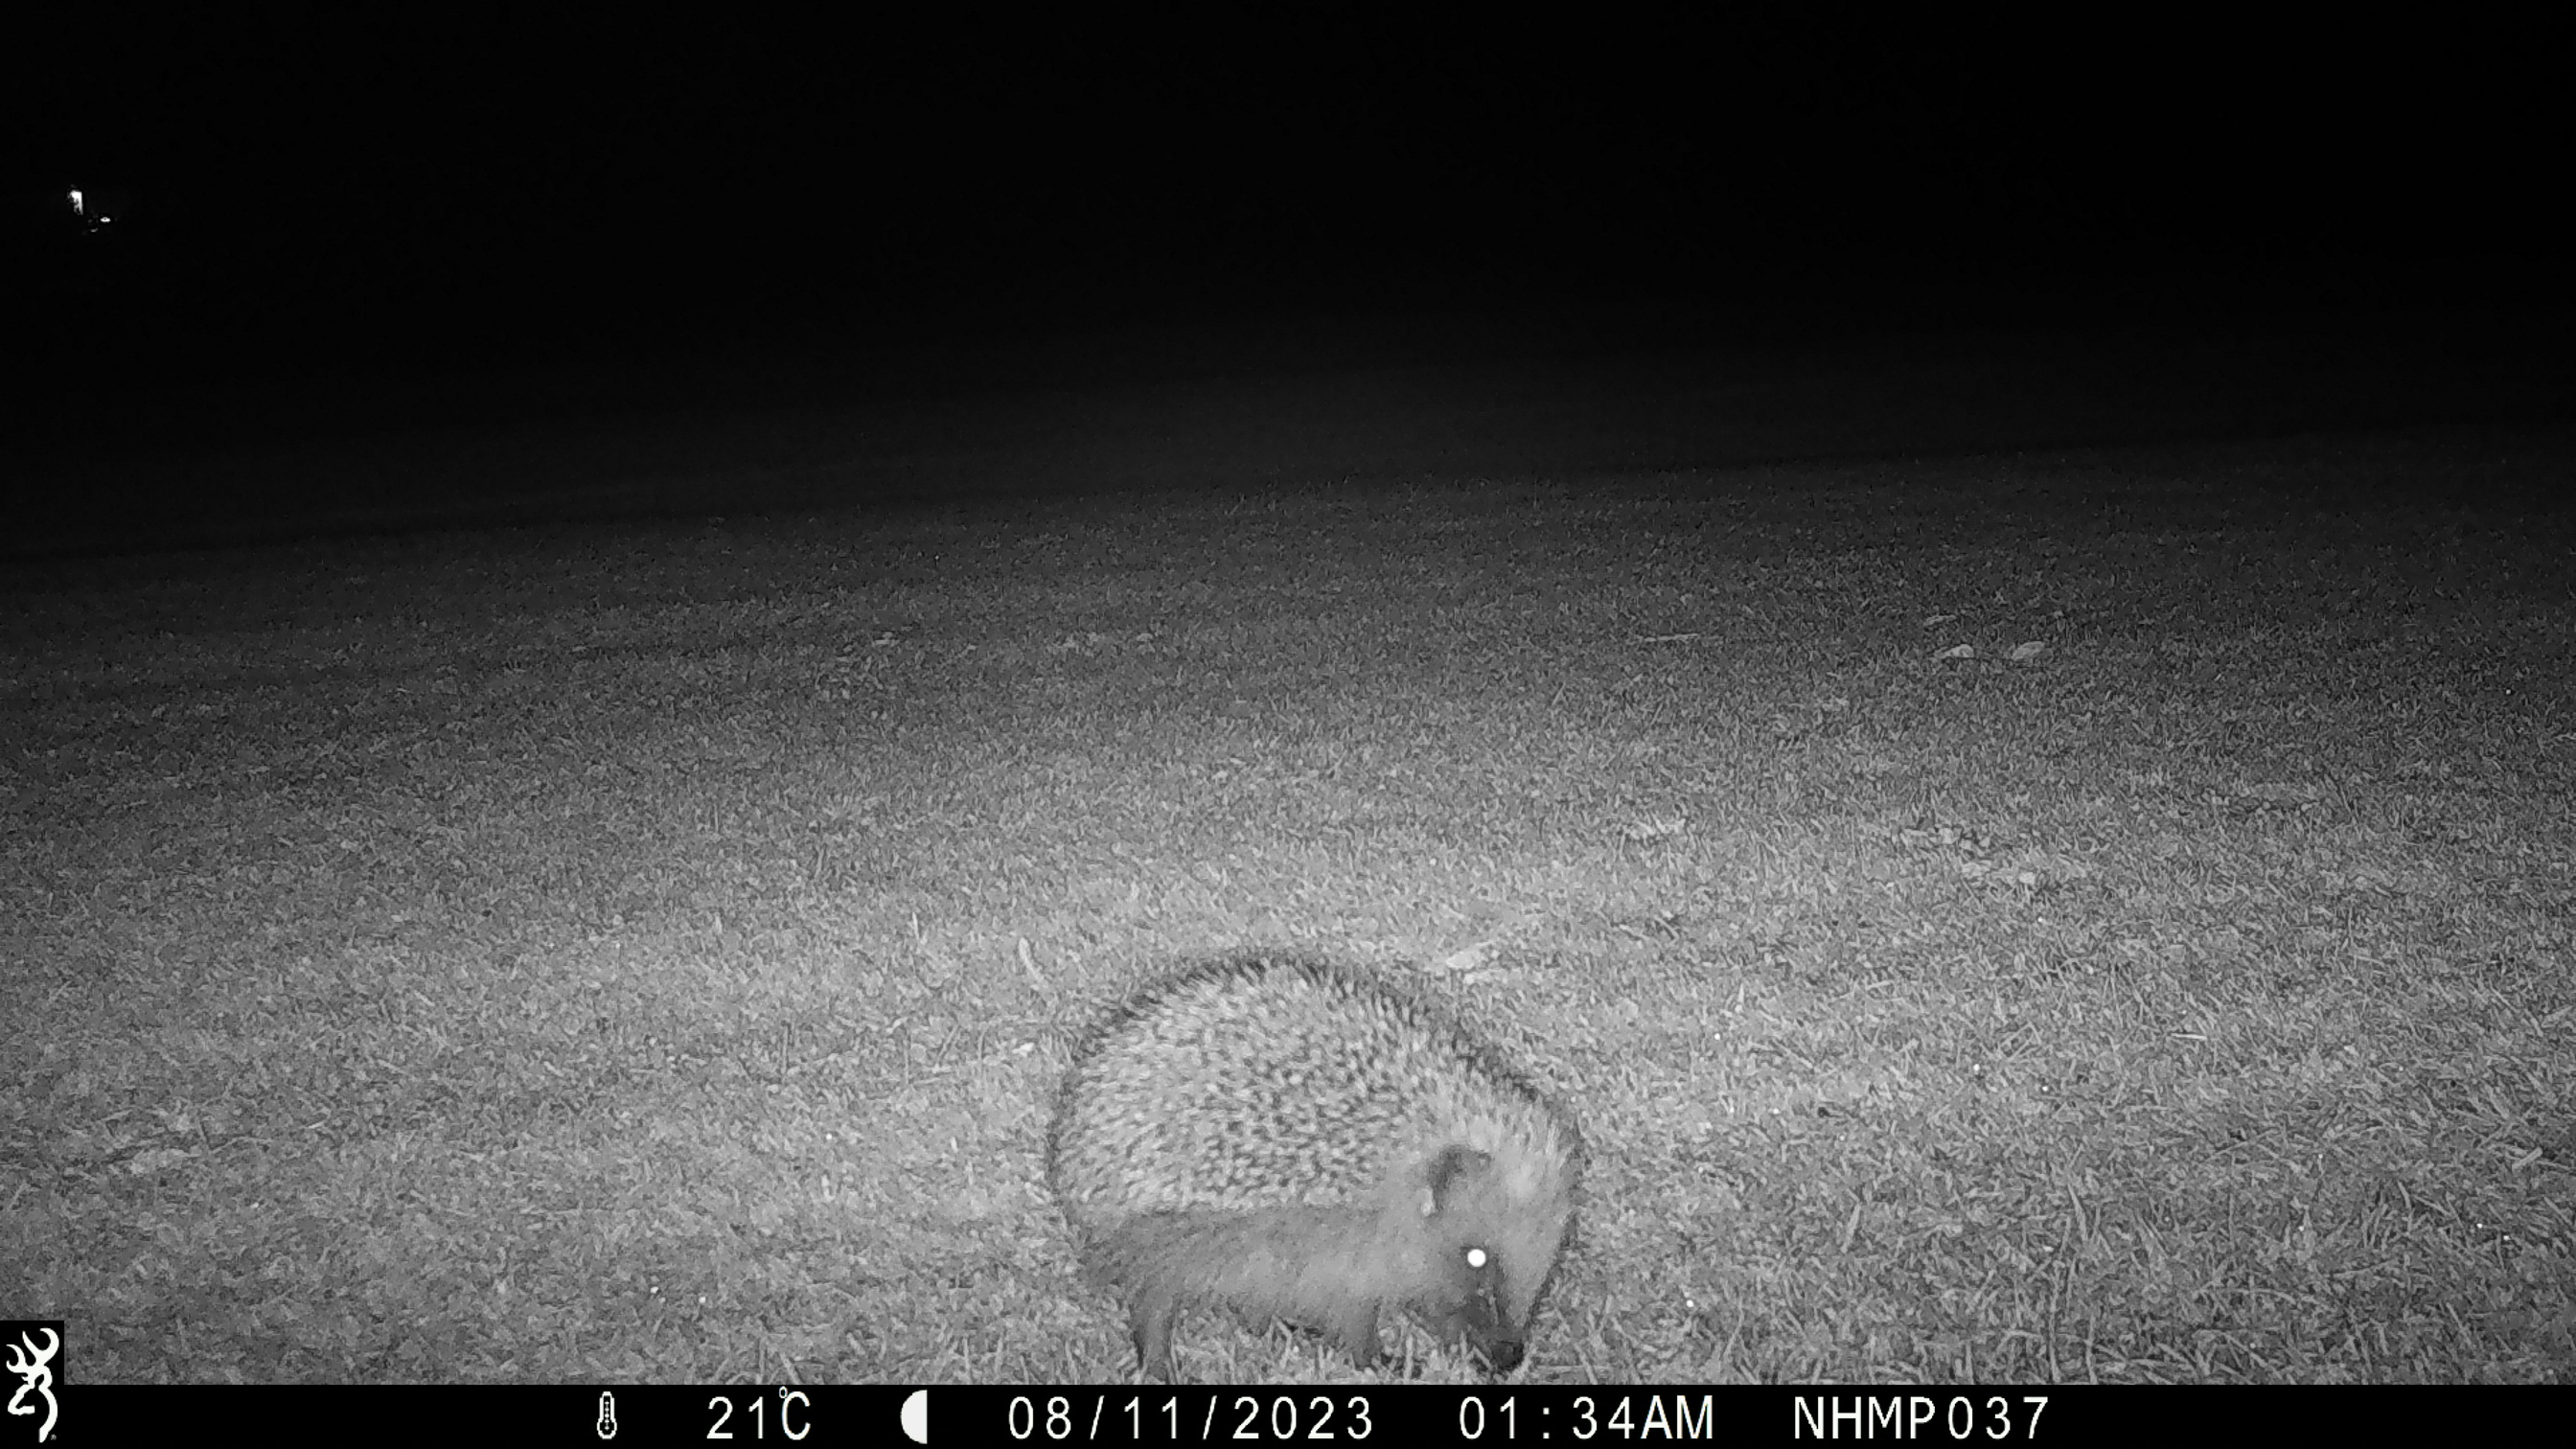 A black and white image of a hedgehog on grass in the darkness